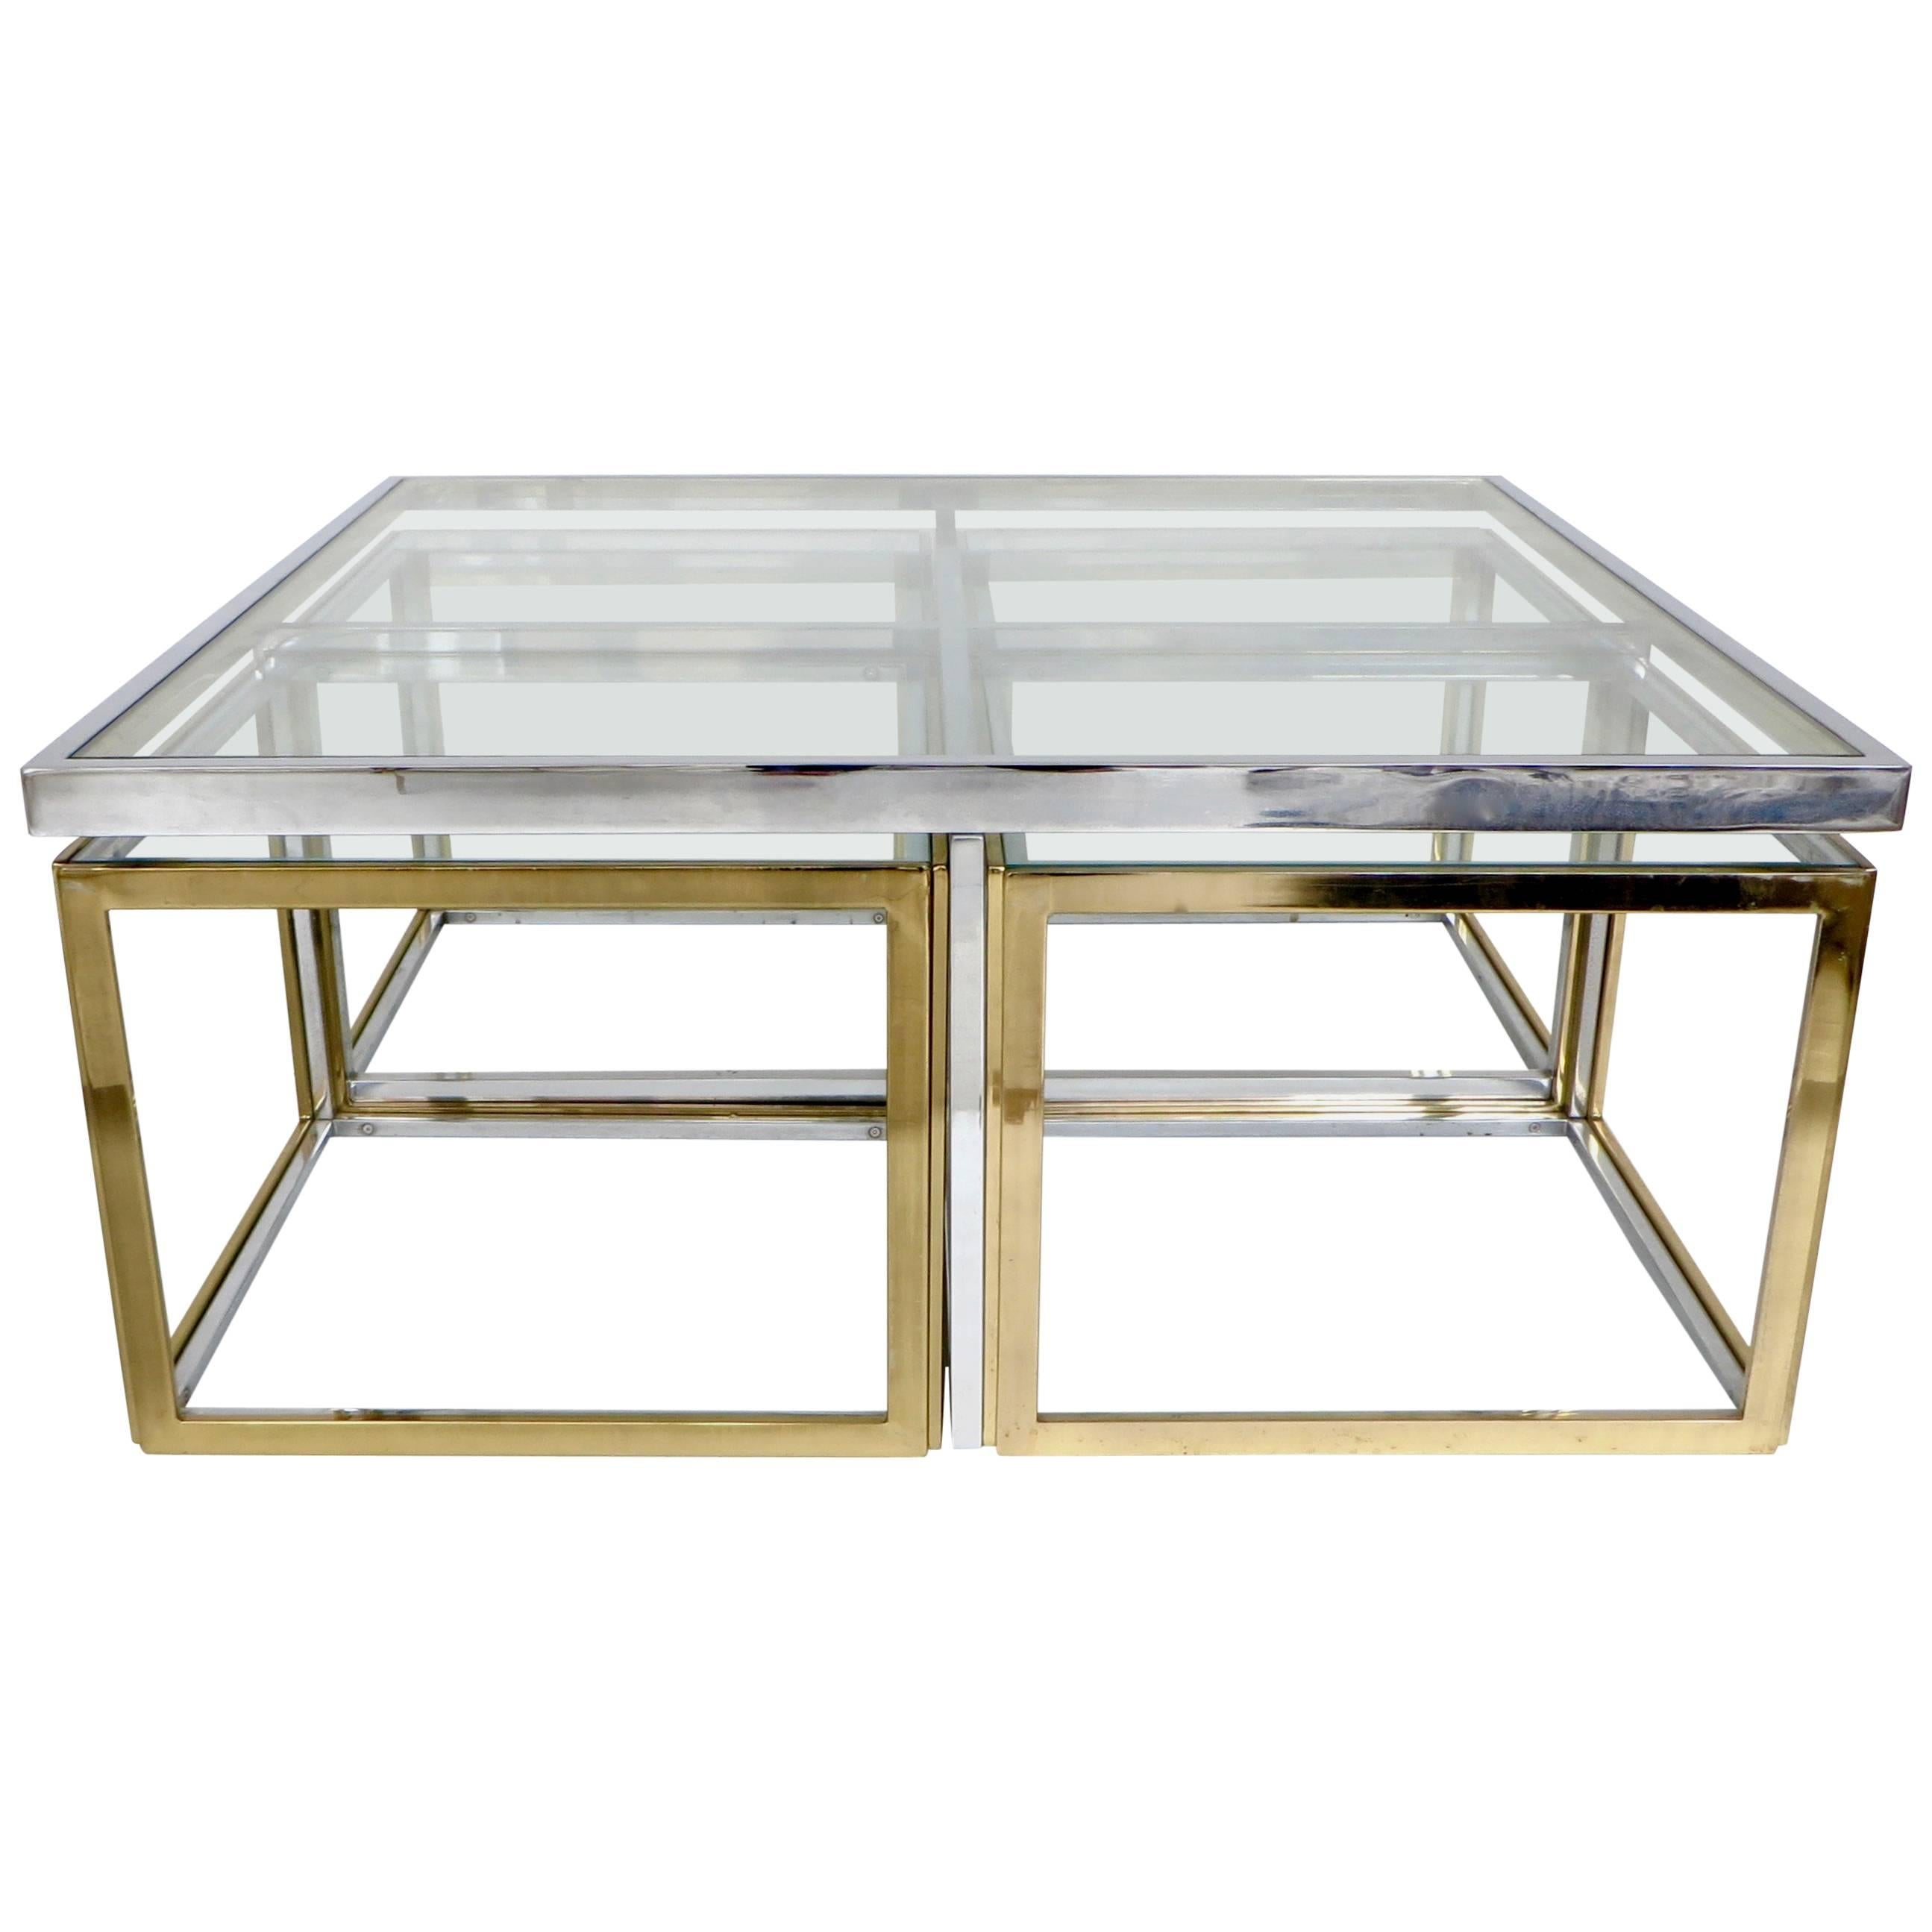 French Maison Jansen Chrome and Brass Multi Part Coffee and Pull-Out Tables